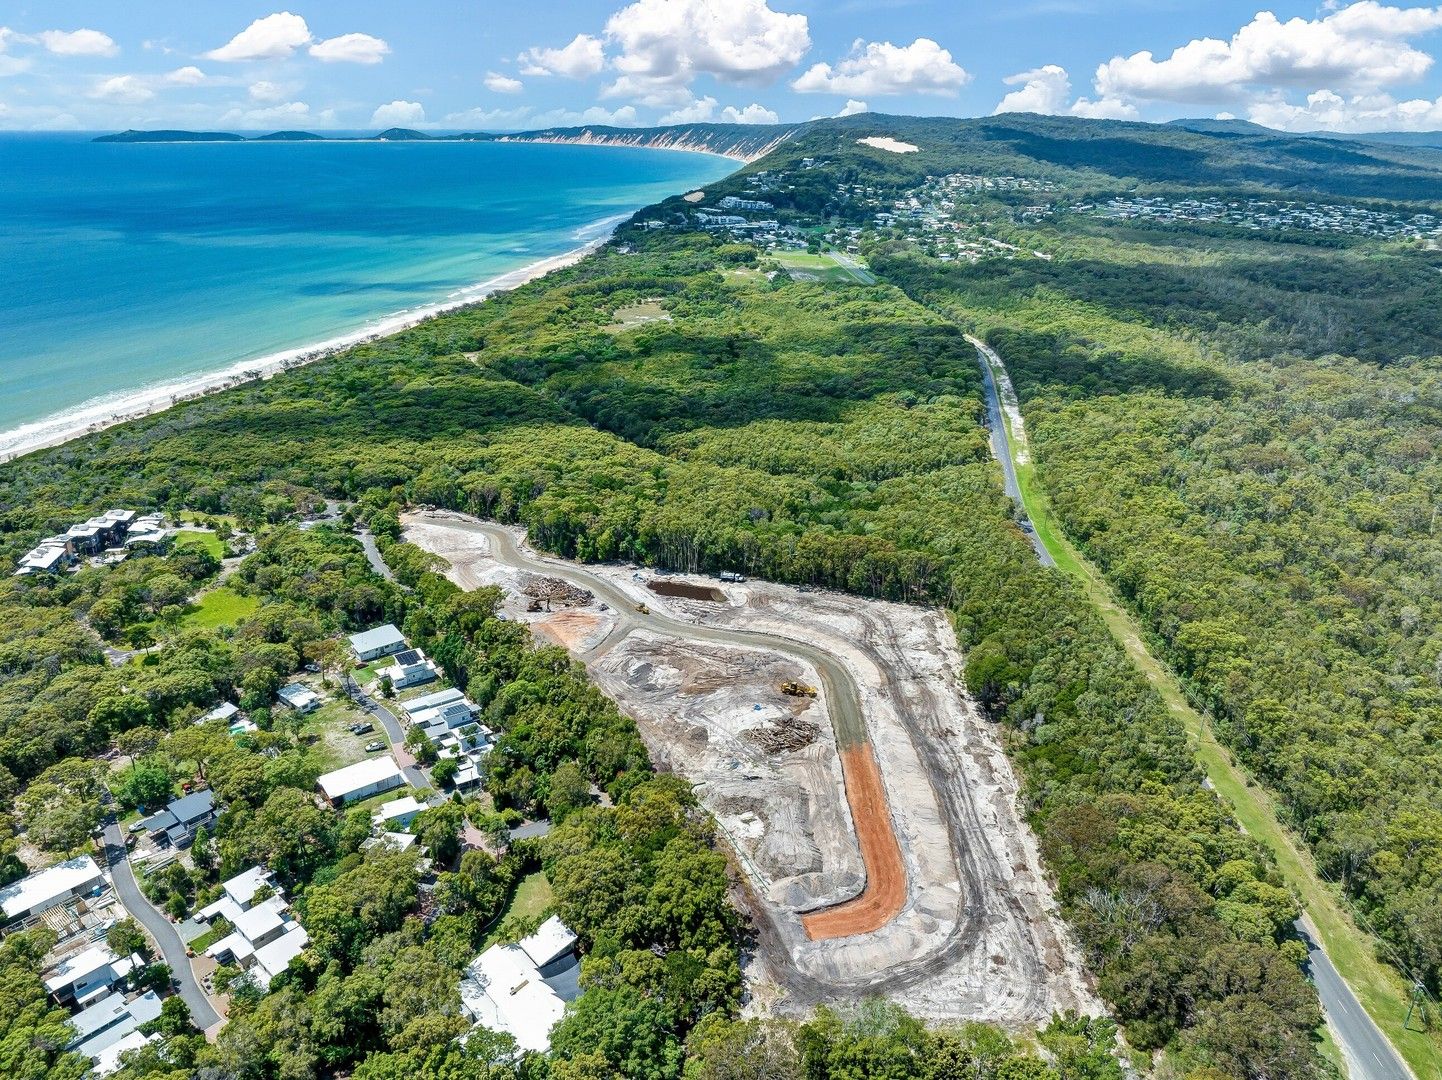 Rainbow Beach QLD 4581 vacant land for Sale, From $450,000 - 2017598200 | Domain